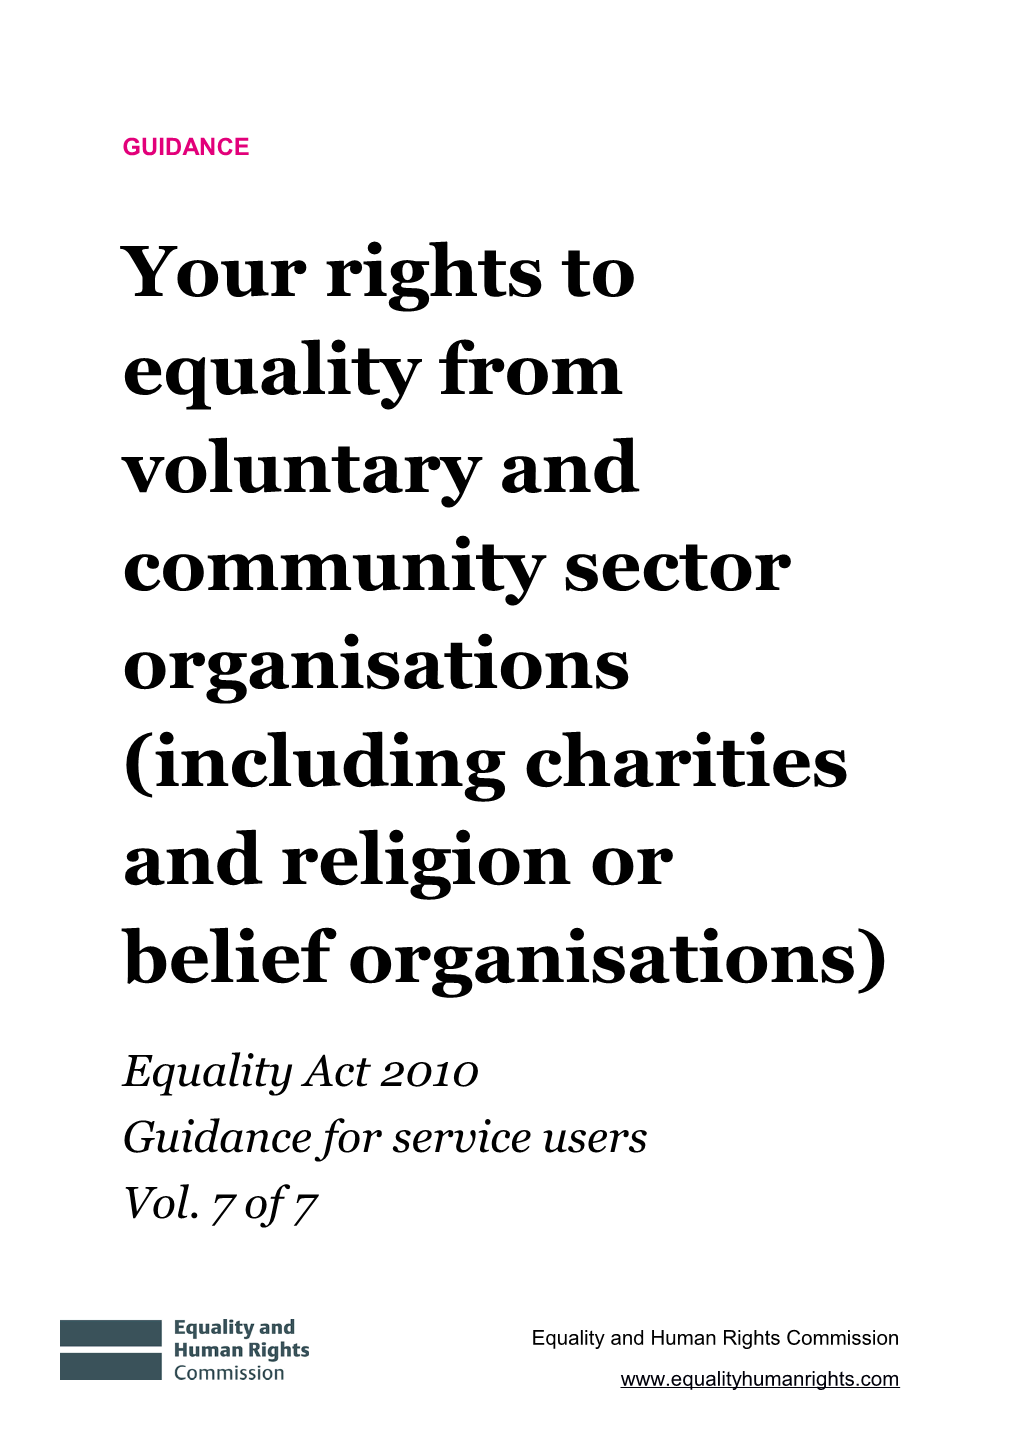 Your Rights to Equality from Voluntary and Community Sector Organisations (Including Charities